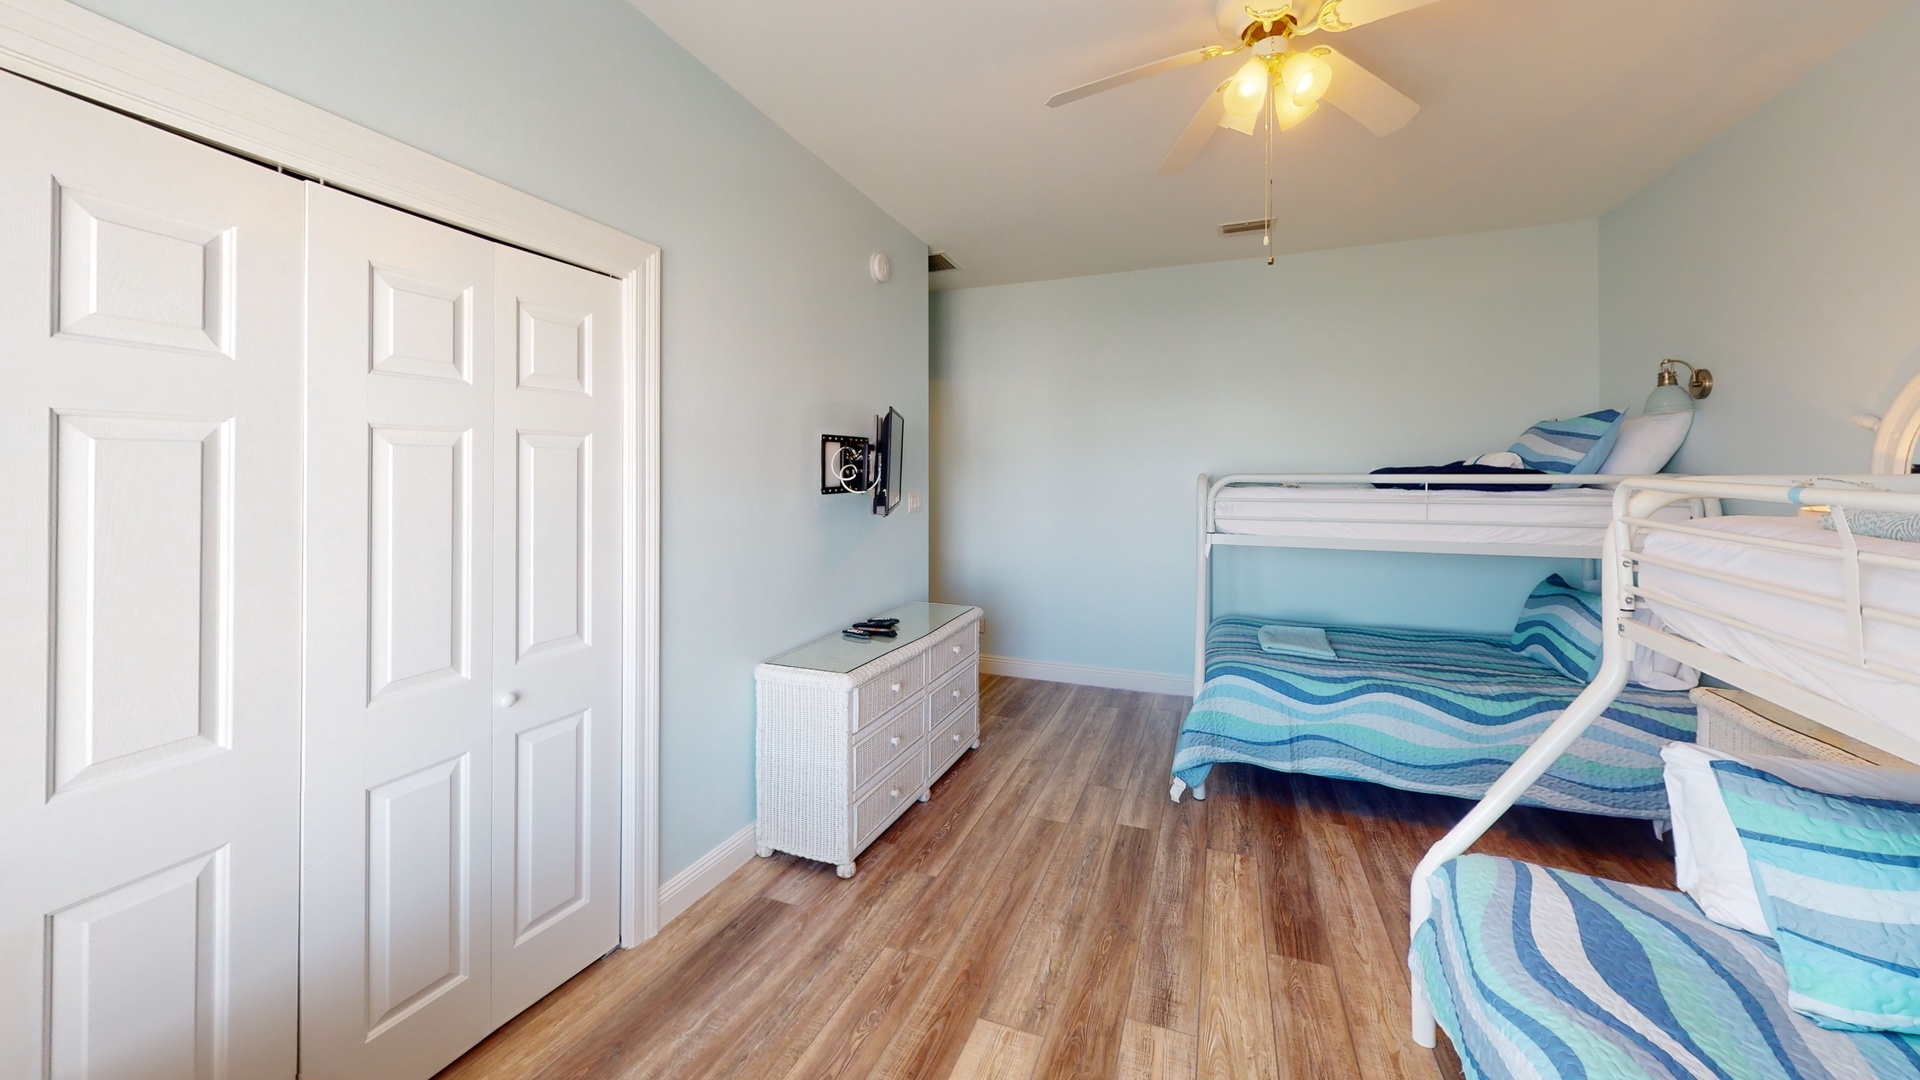 Bedroom 8 features two twin over full bunk beds-sleeps 6, TV with cable and an attached, private bathroom